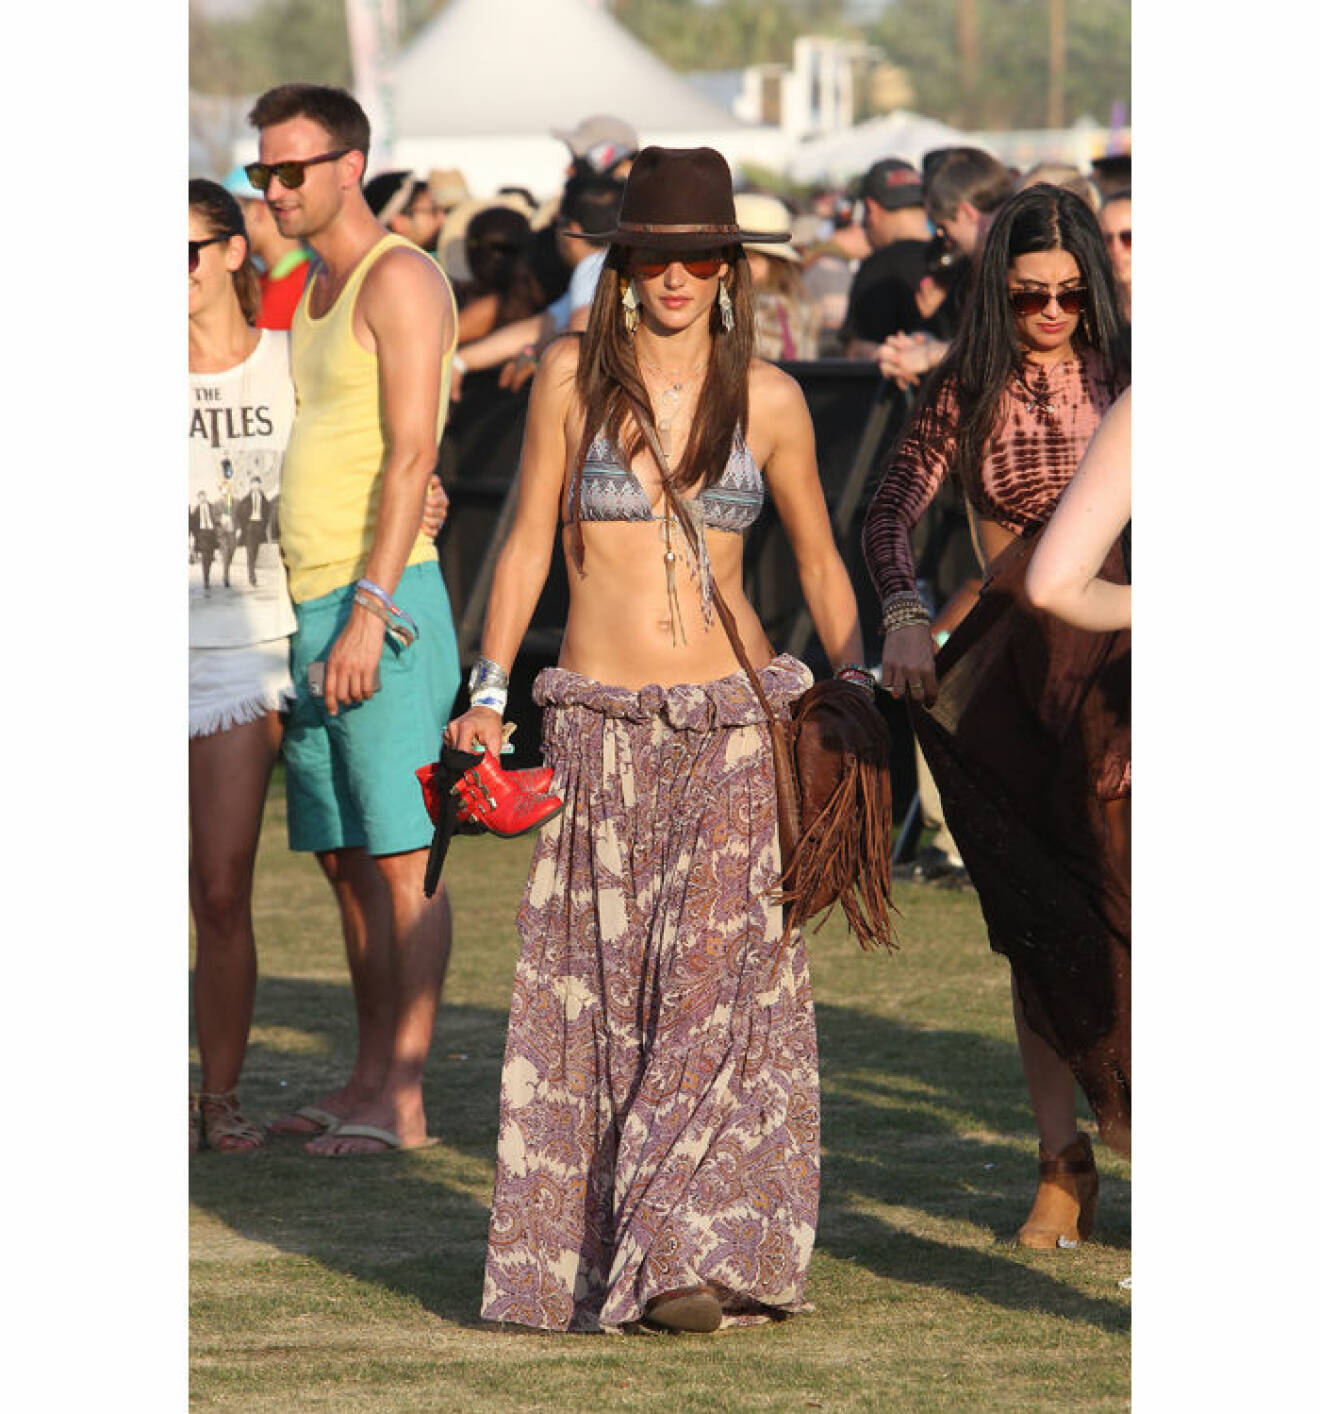 EXCLUSIVE: Alessandra Ambrosio rolls down her dress and shows a little skin at Coachella